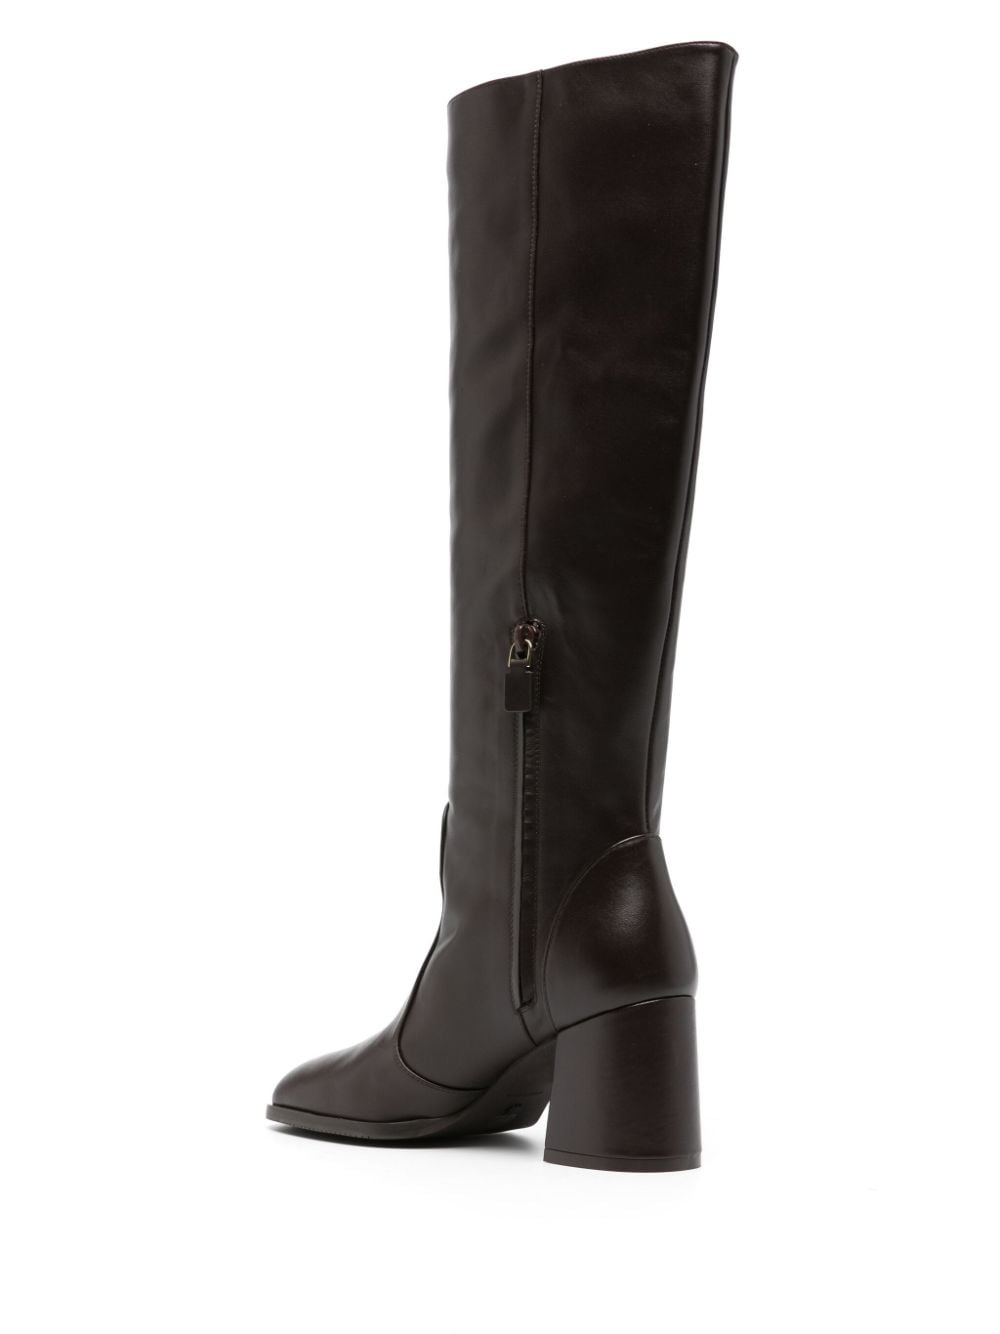 NOLA SMOOTH-LEATHER KNEE-HIGH BOOTS